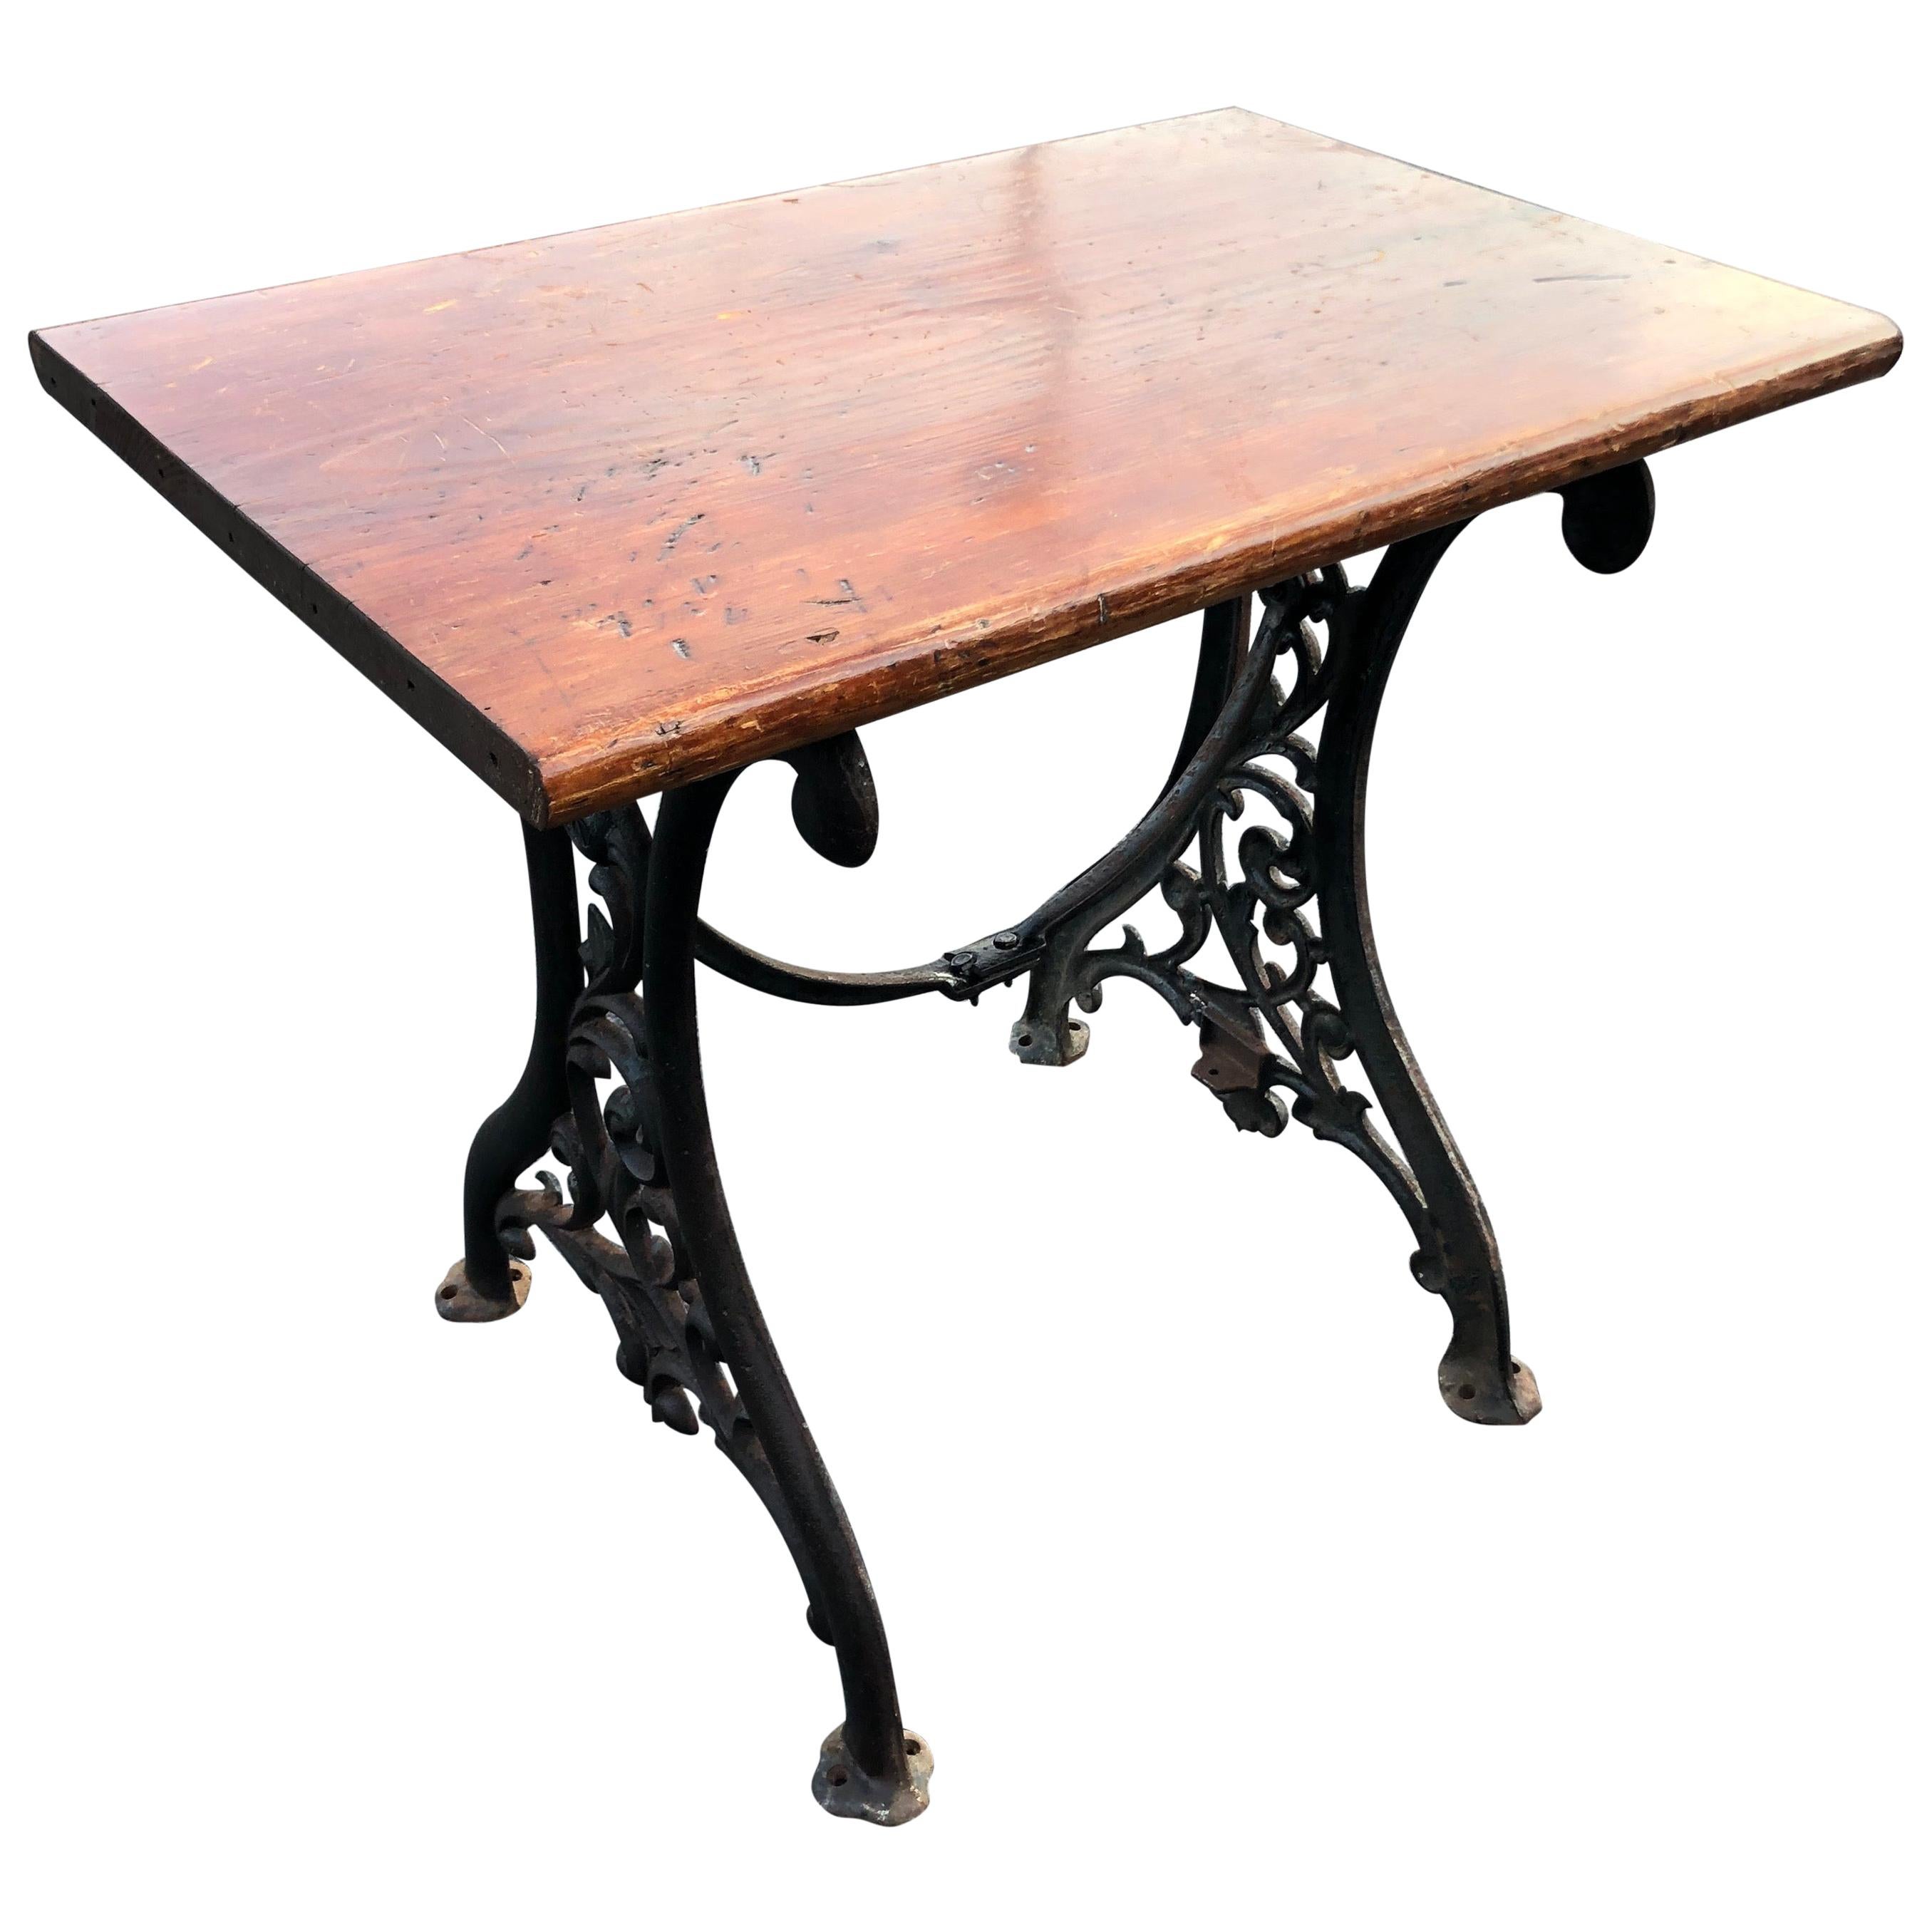 Victorian School Desk or Sewing Table